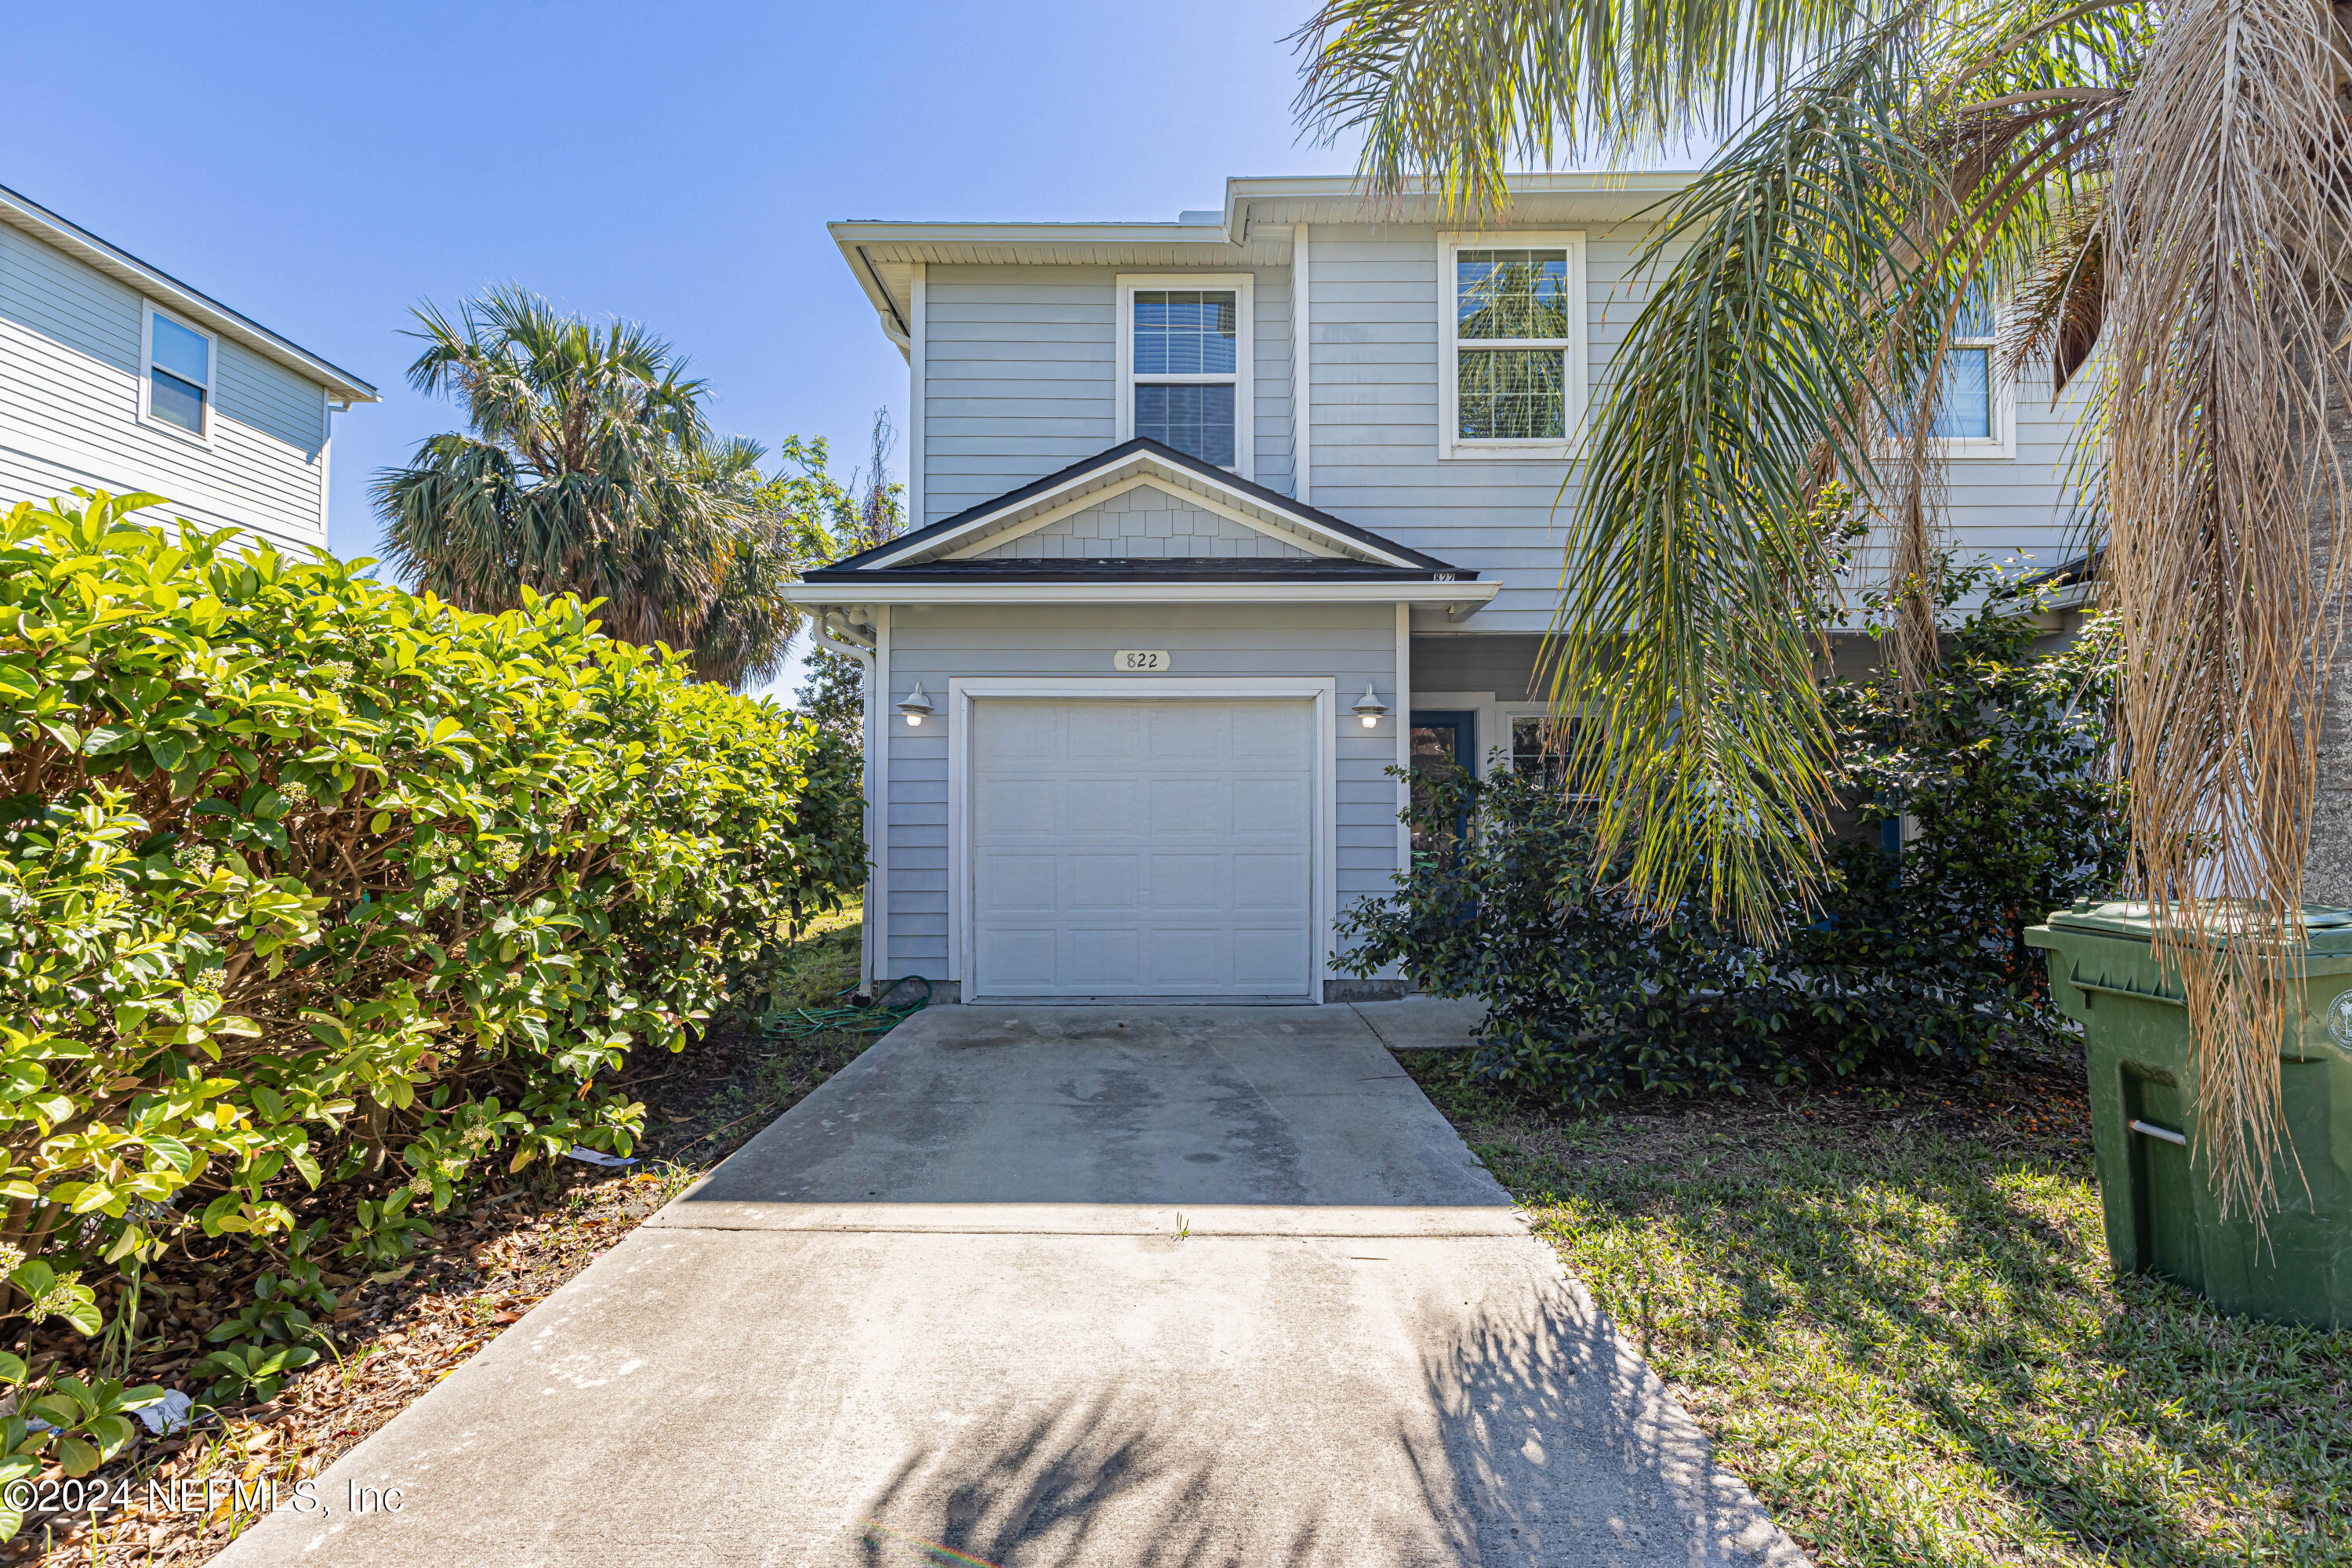 Jacksonville Beach, FL home for sale located at 822 4th Avenue S, Jacksonville Beach, FL 32250